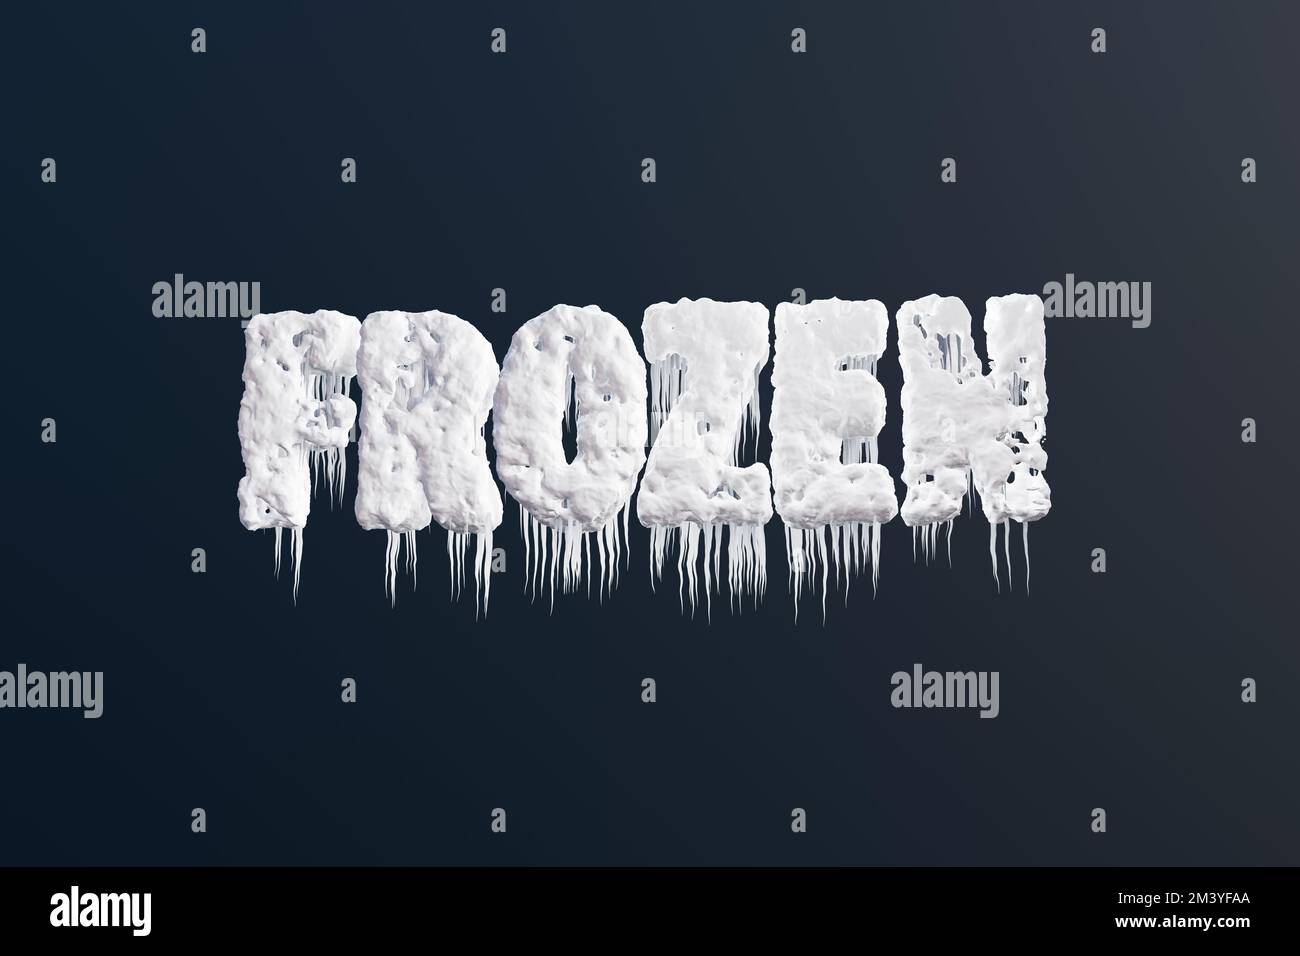 Alphabets FROZEN covered with snow, ice and icicles on dark background. Illustration of the concept of blizzard, winter, coldness and snowfall Stock Photo